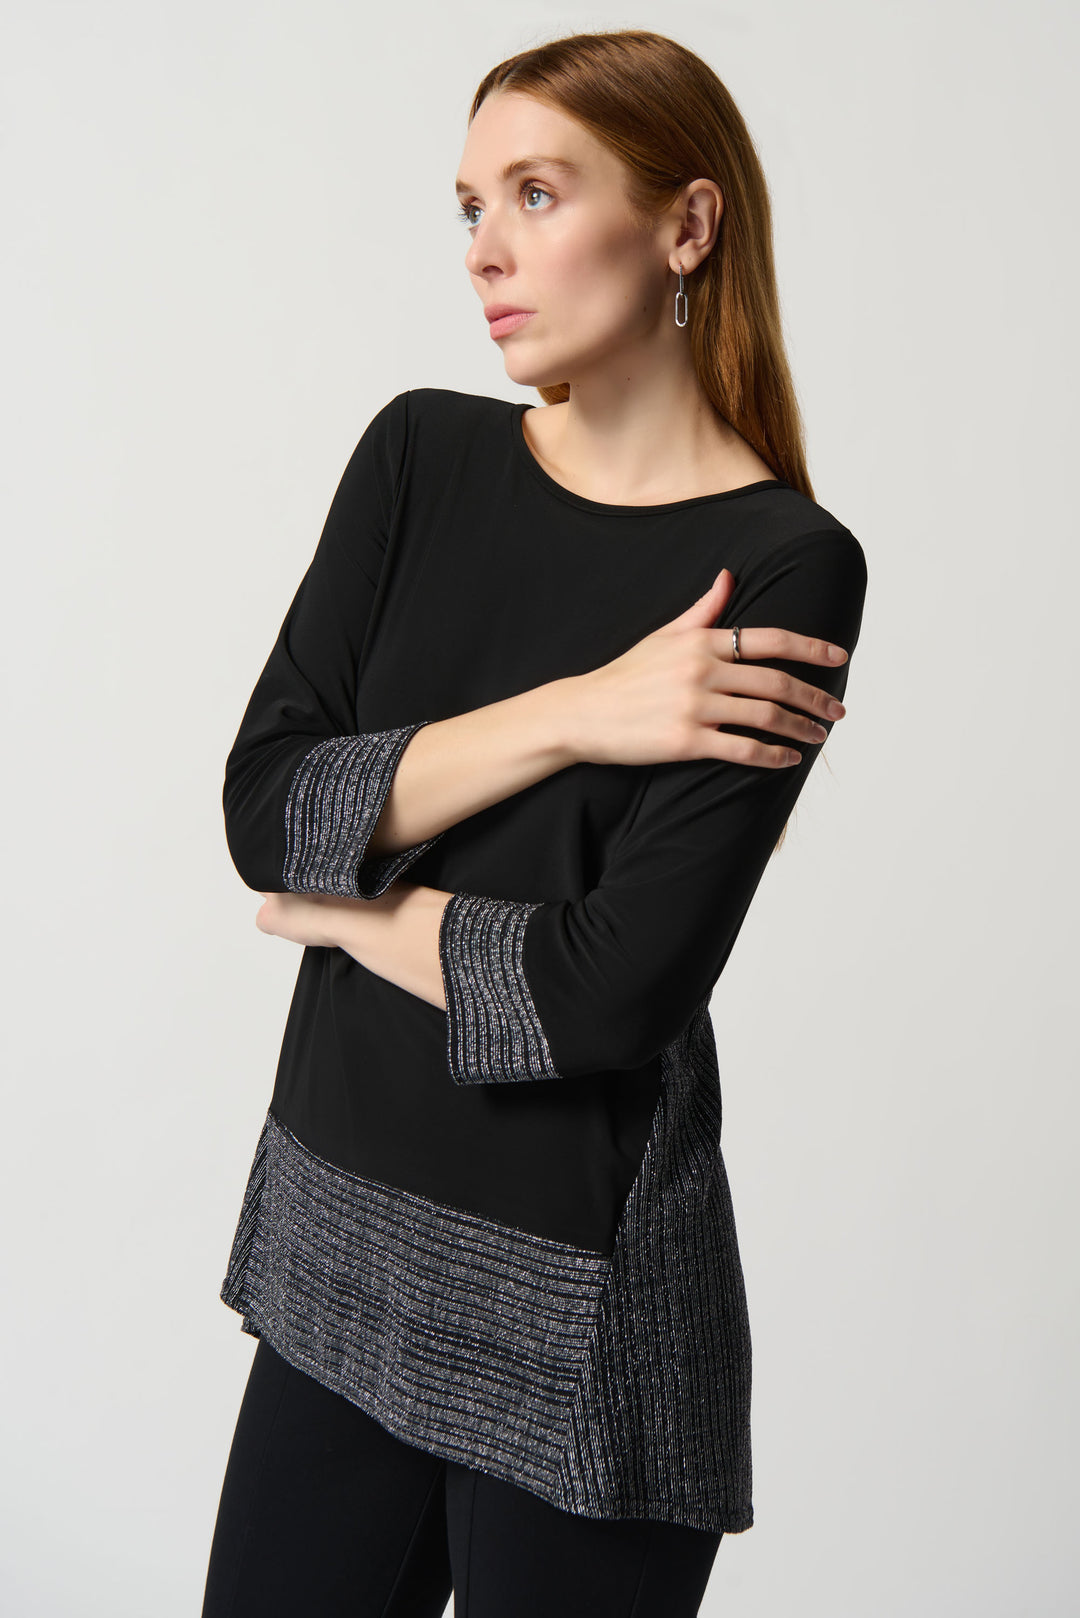 Its 3/4 length sleeves and loose fit provide an effortless feel, while its shimmering details on the cuffs and lower portion give a hint of luxury. 